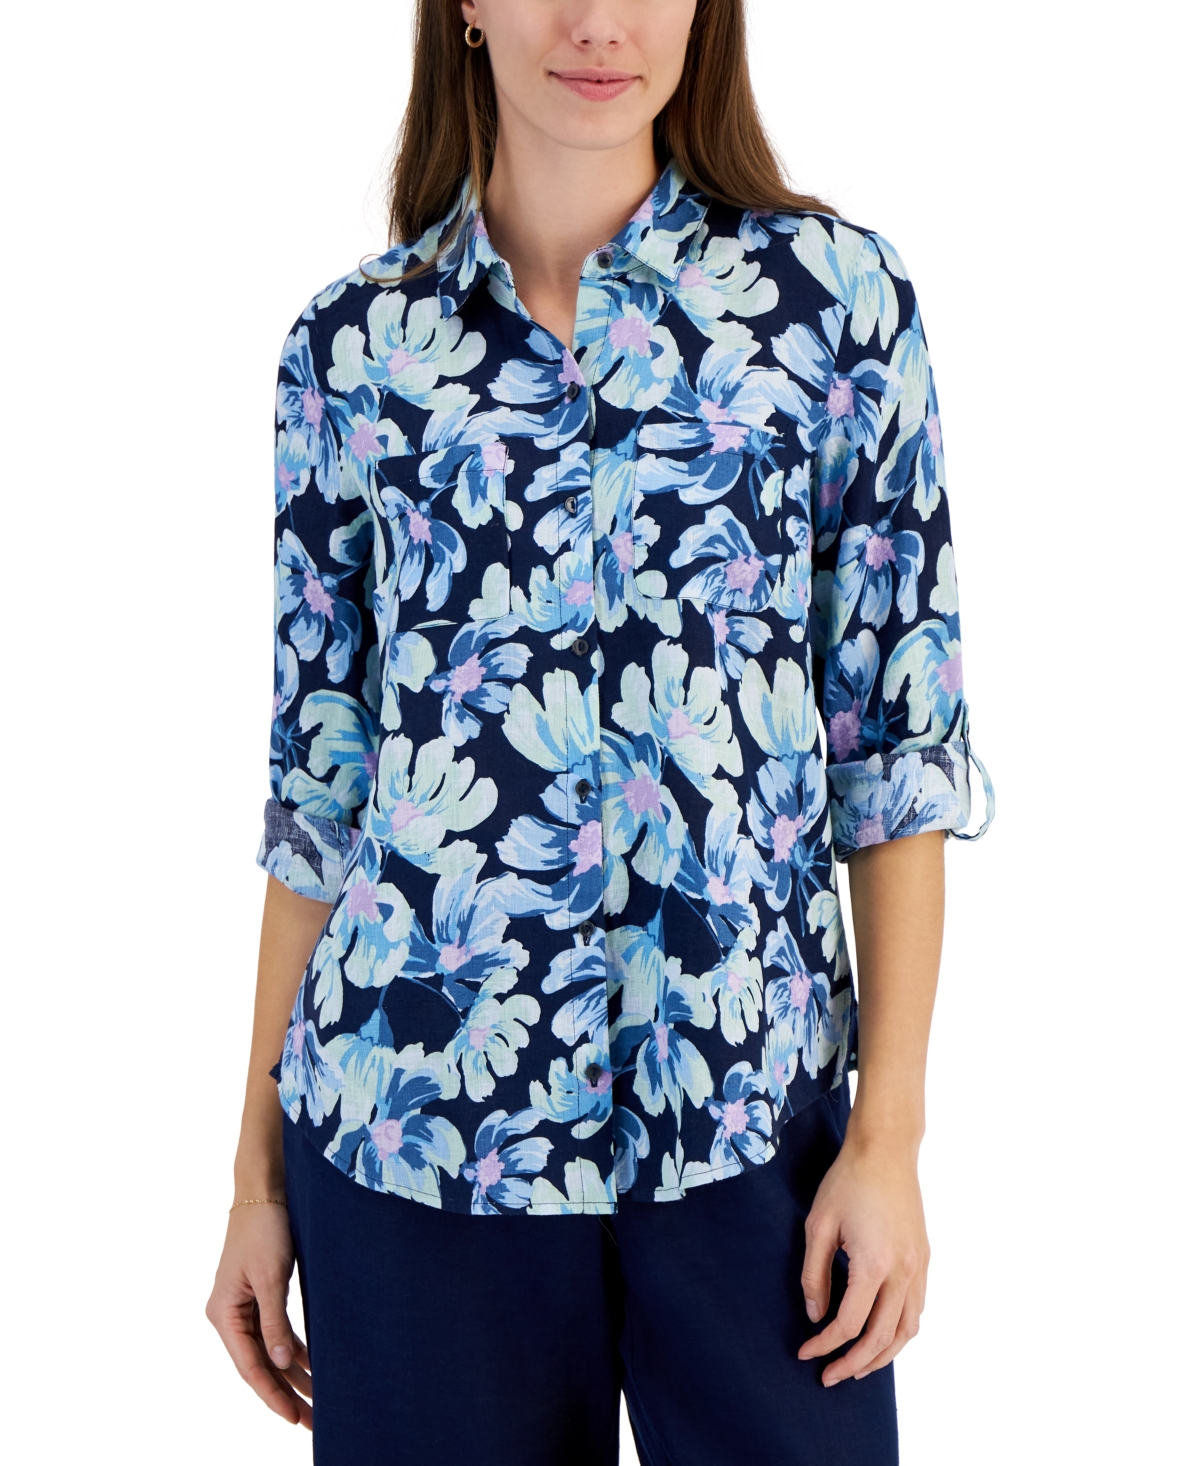 Women's Morning Bloom 100% Linen Printed Shirt, Created for Macy's - Intrepid Blue Combo